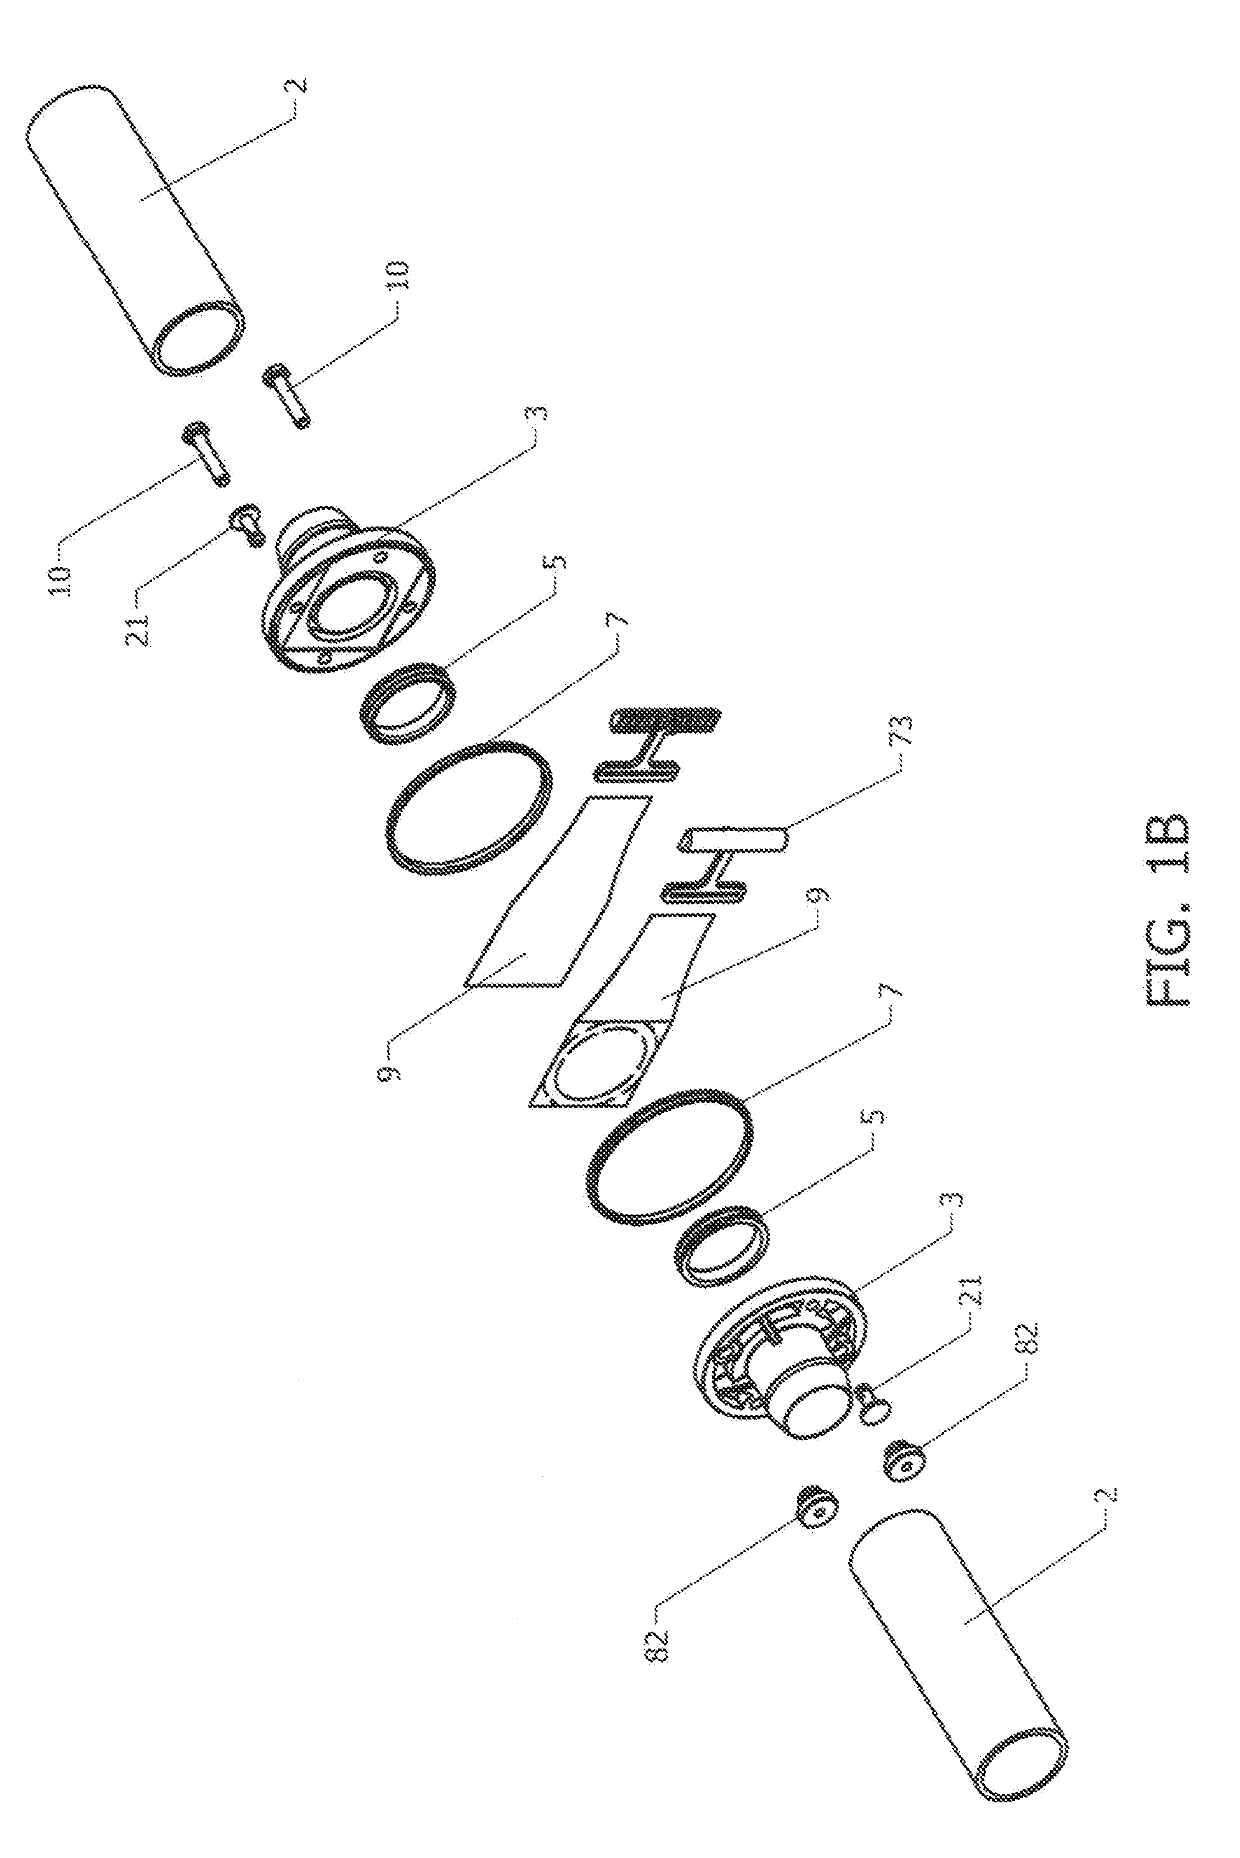 Device for Aseptically Connecting Large Bore Tubing